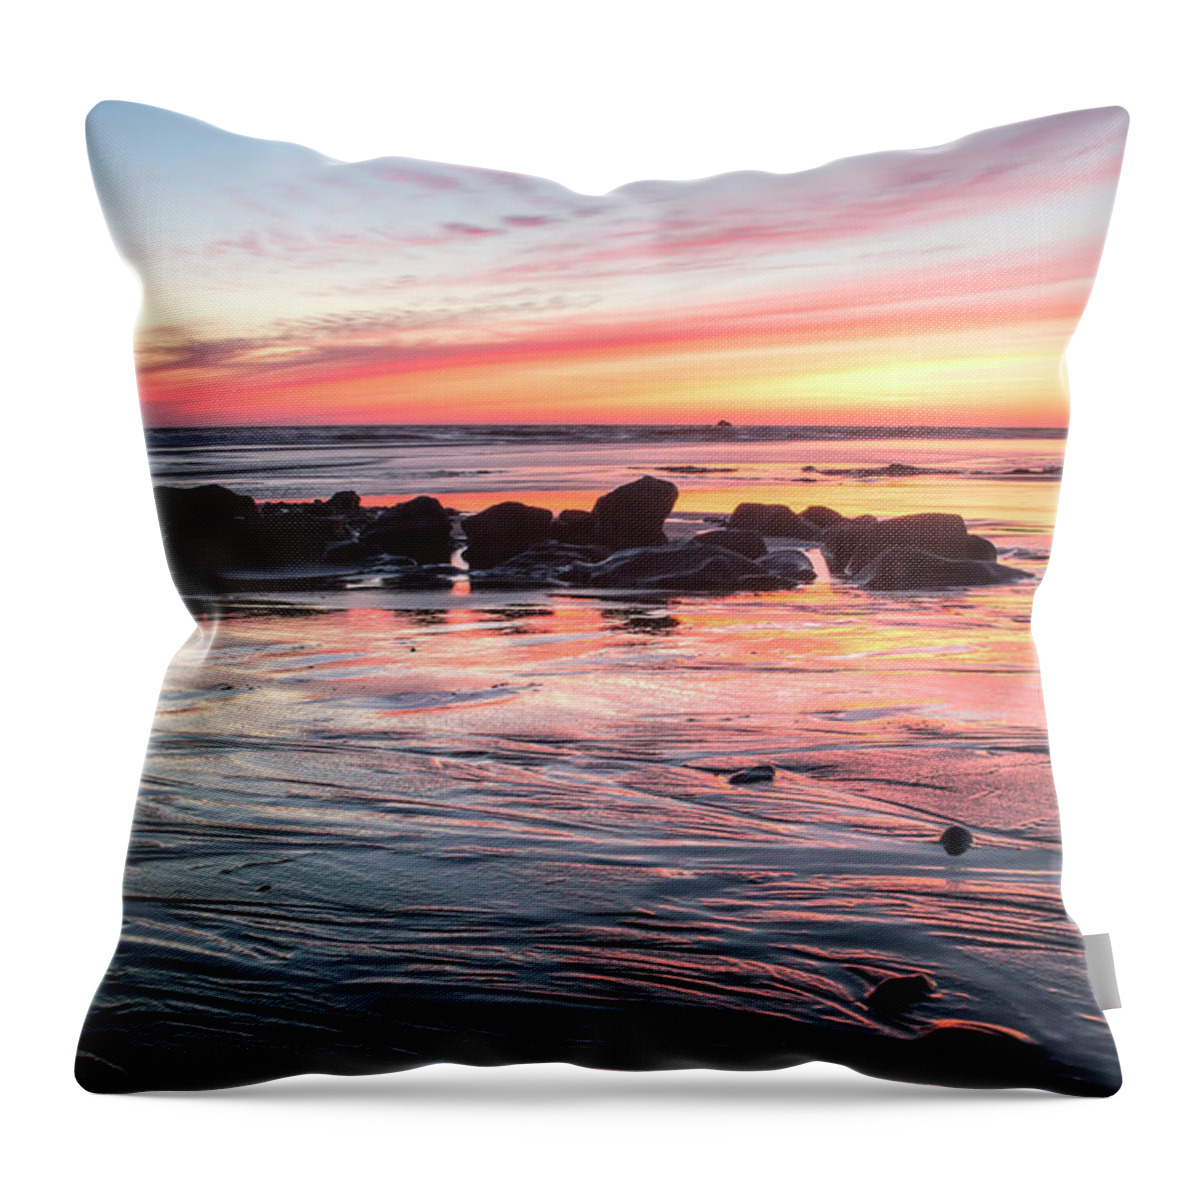 Sunset Throw Pillow featuring the photograph The Afterglow by Kristina Rinell